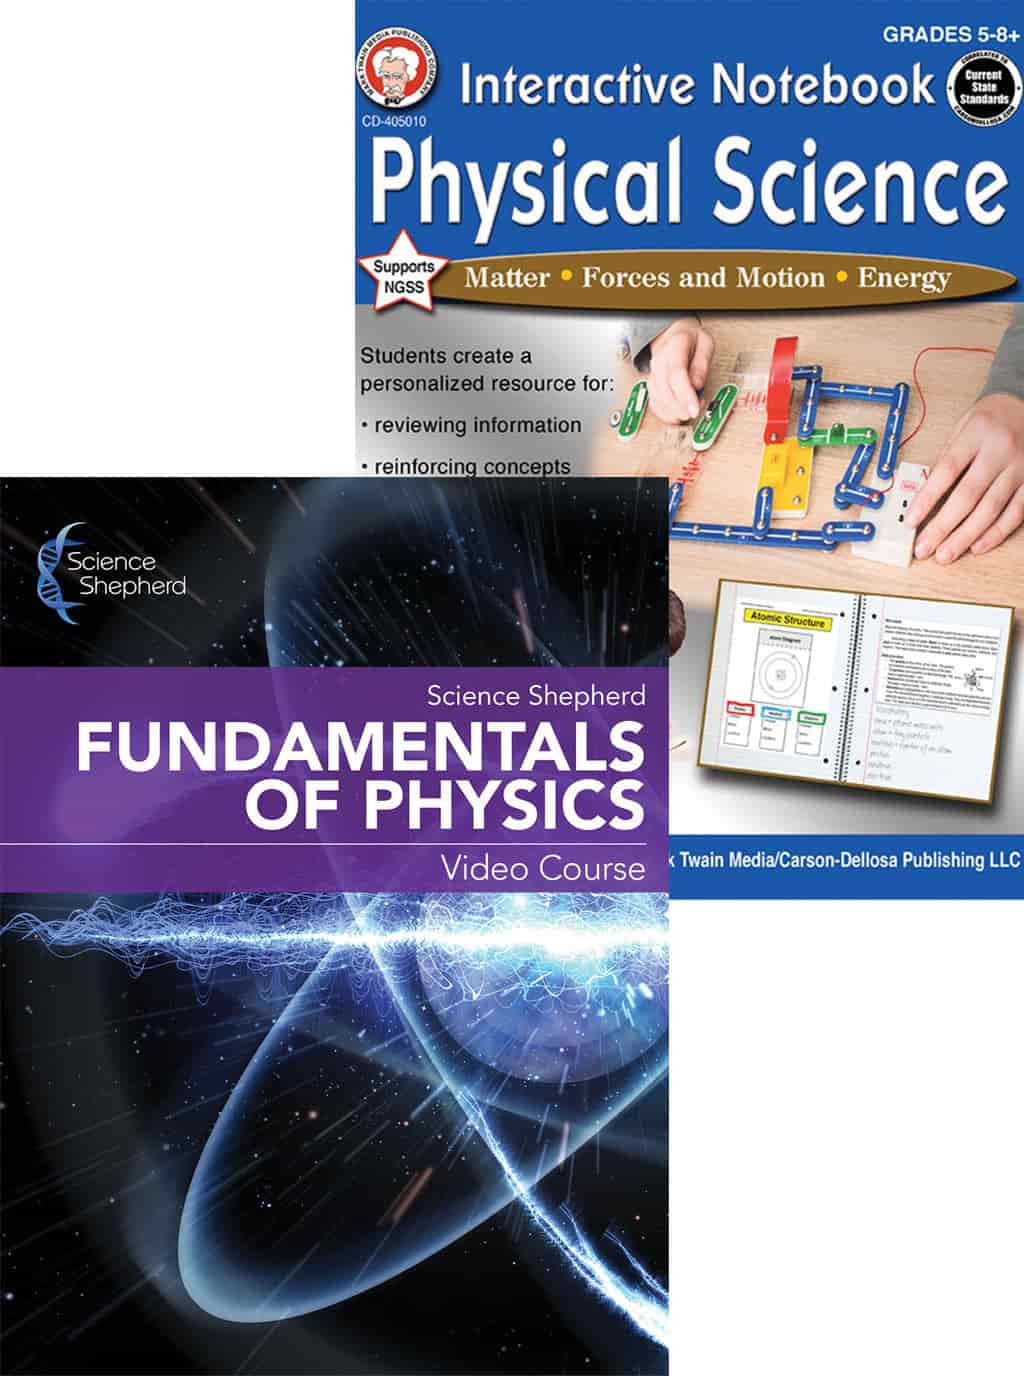 Fundamentals of Physics homeschool videos and lab book covers